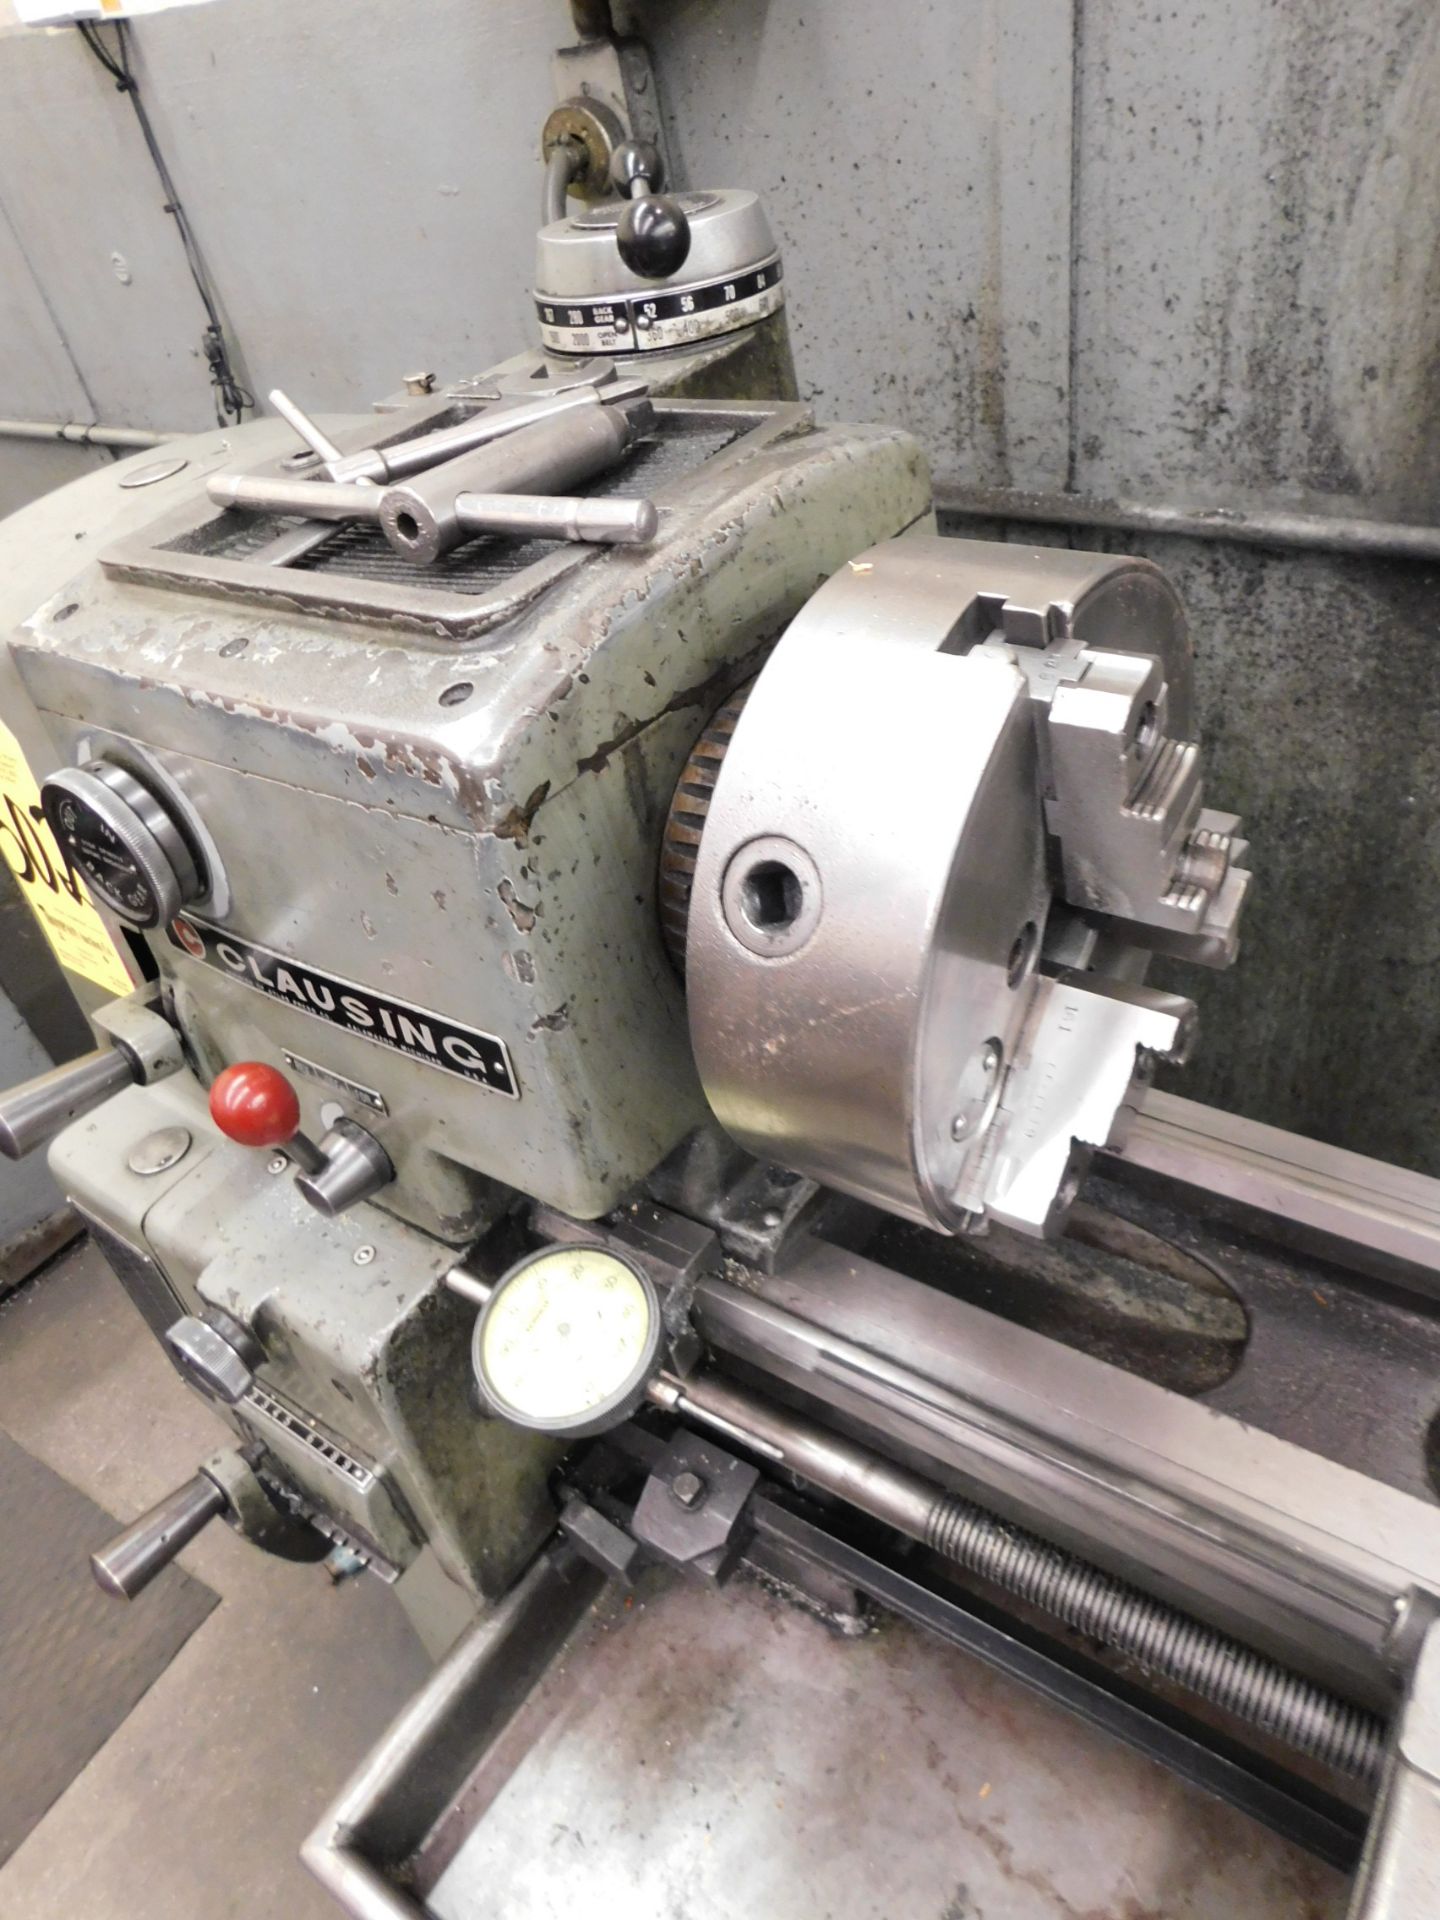 Clausing Model 5914 12 Inch X 36 Inch Lathe, s/n 508361, 8 Inch 3-Jaw Chuck, 8 Inch 4-Jaw Chuck, 4 - Image 4 of 6